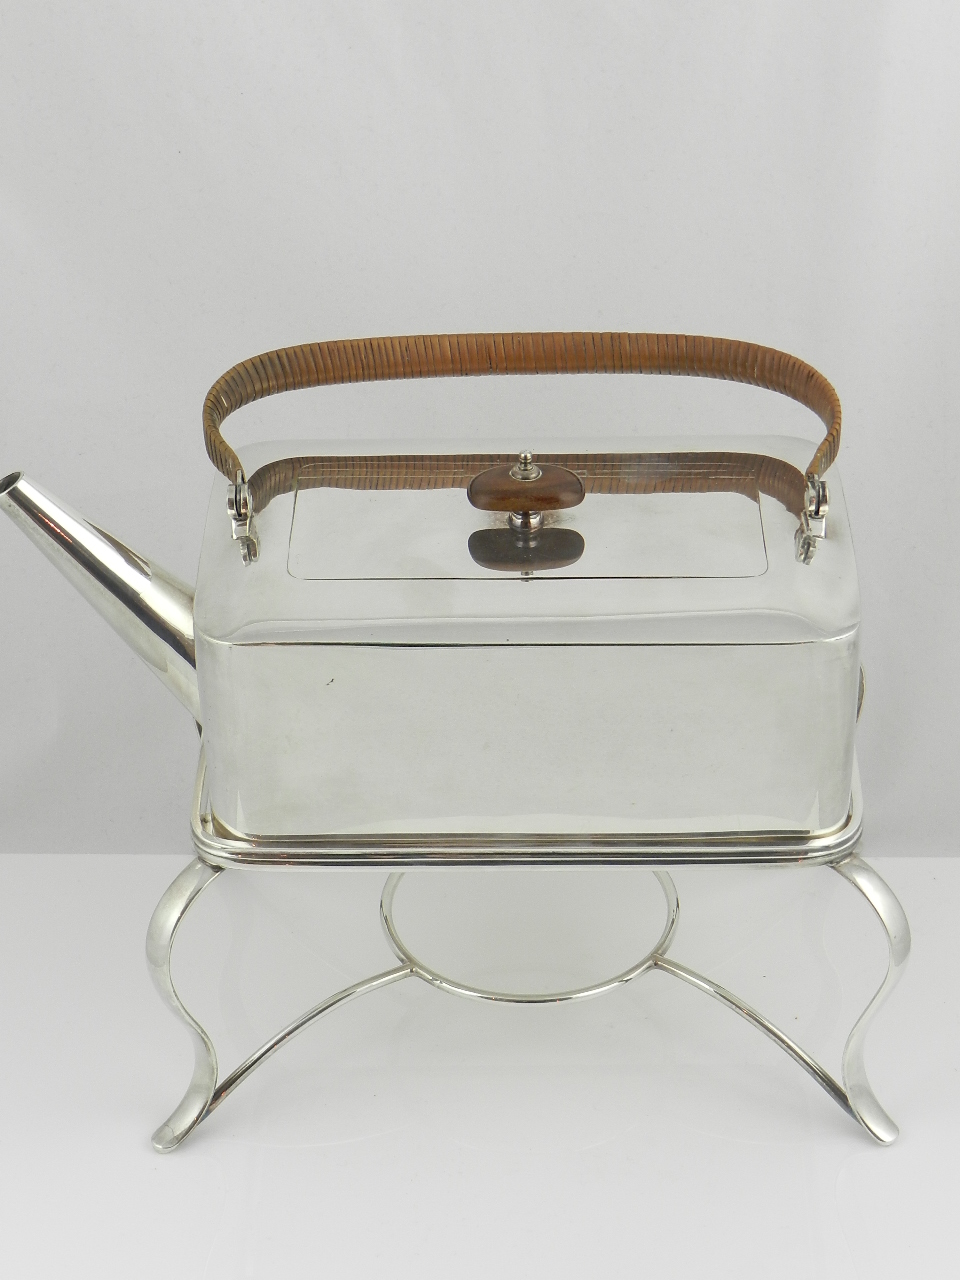 A 1920s Mappin & Webb silver plated spirit kettle on original stand, styled by Christopher